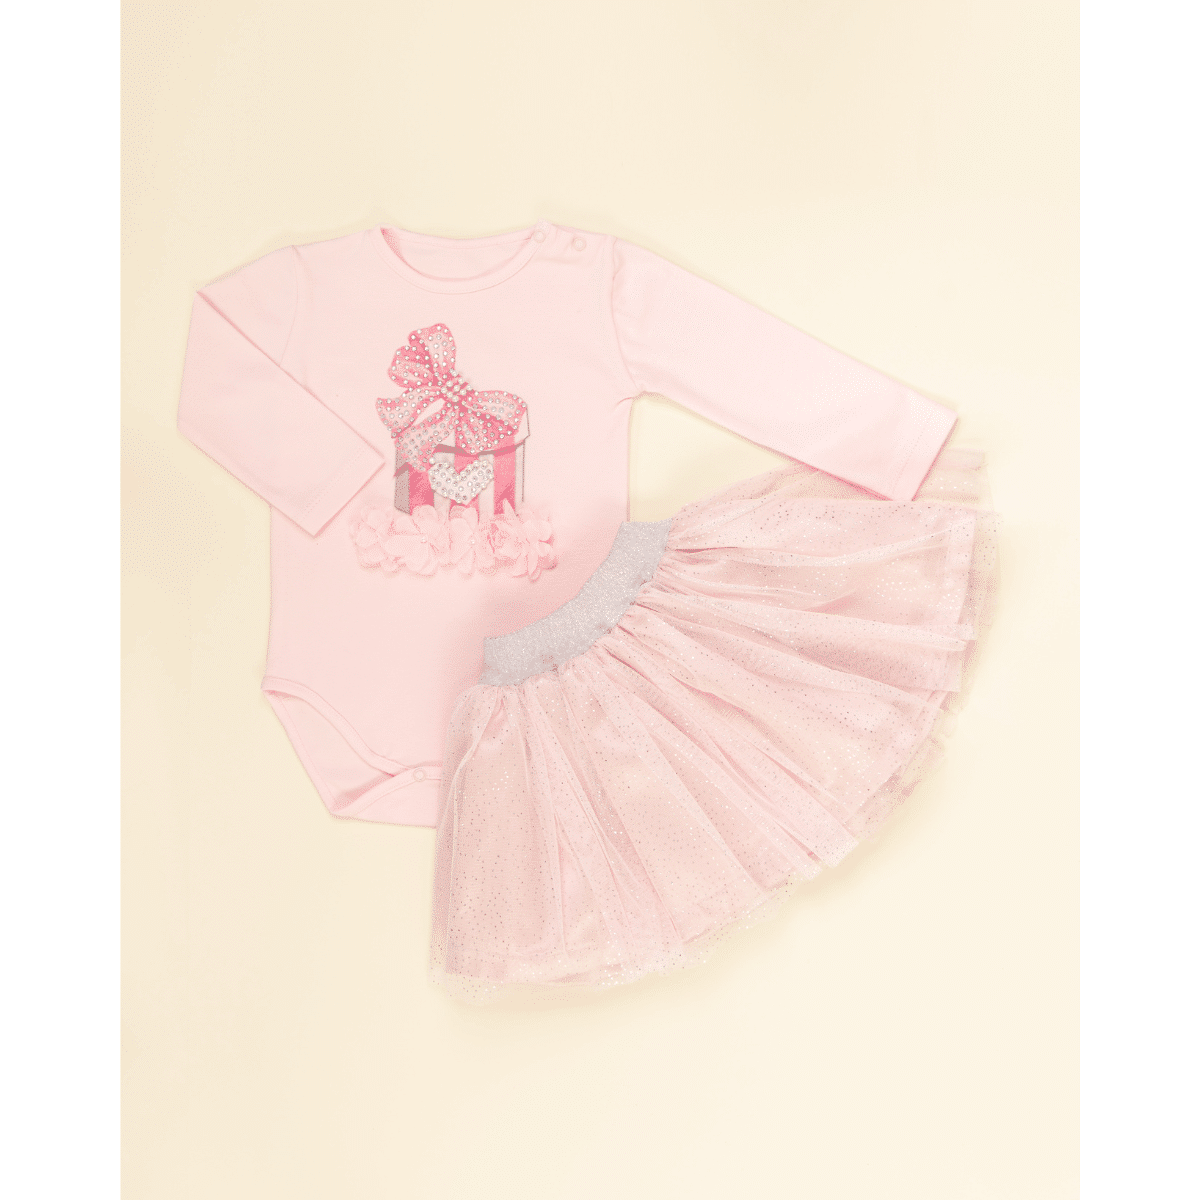 Caramelo pink tulle skirt on baby model flat lay